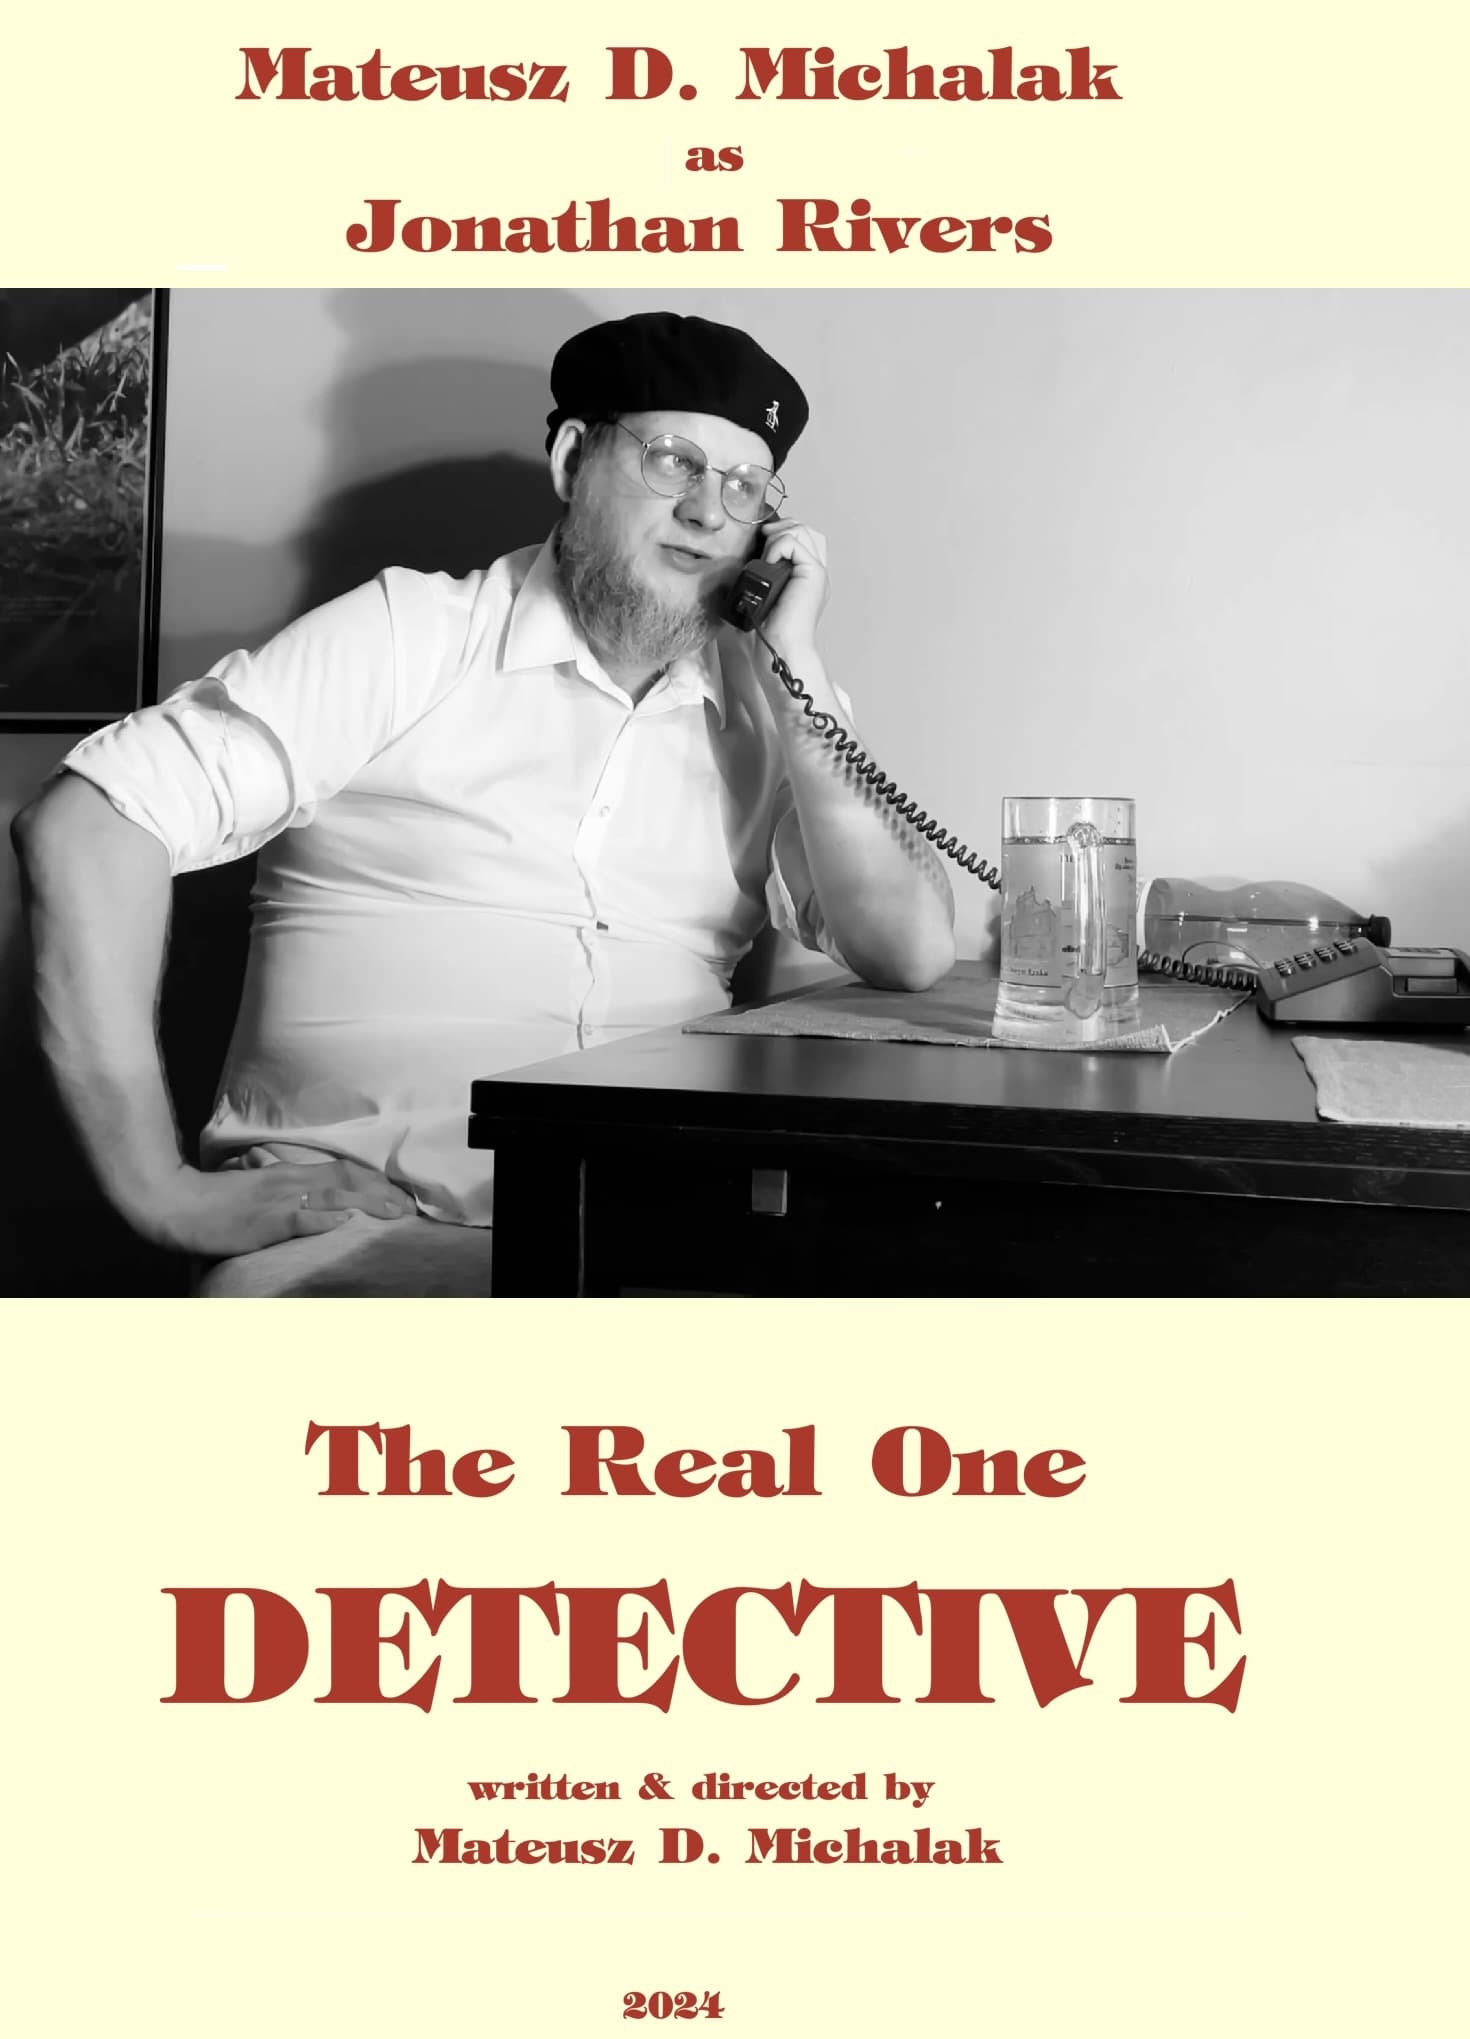 The Real One Detective